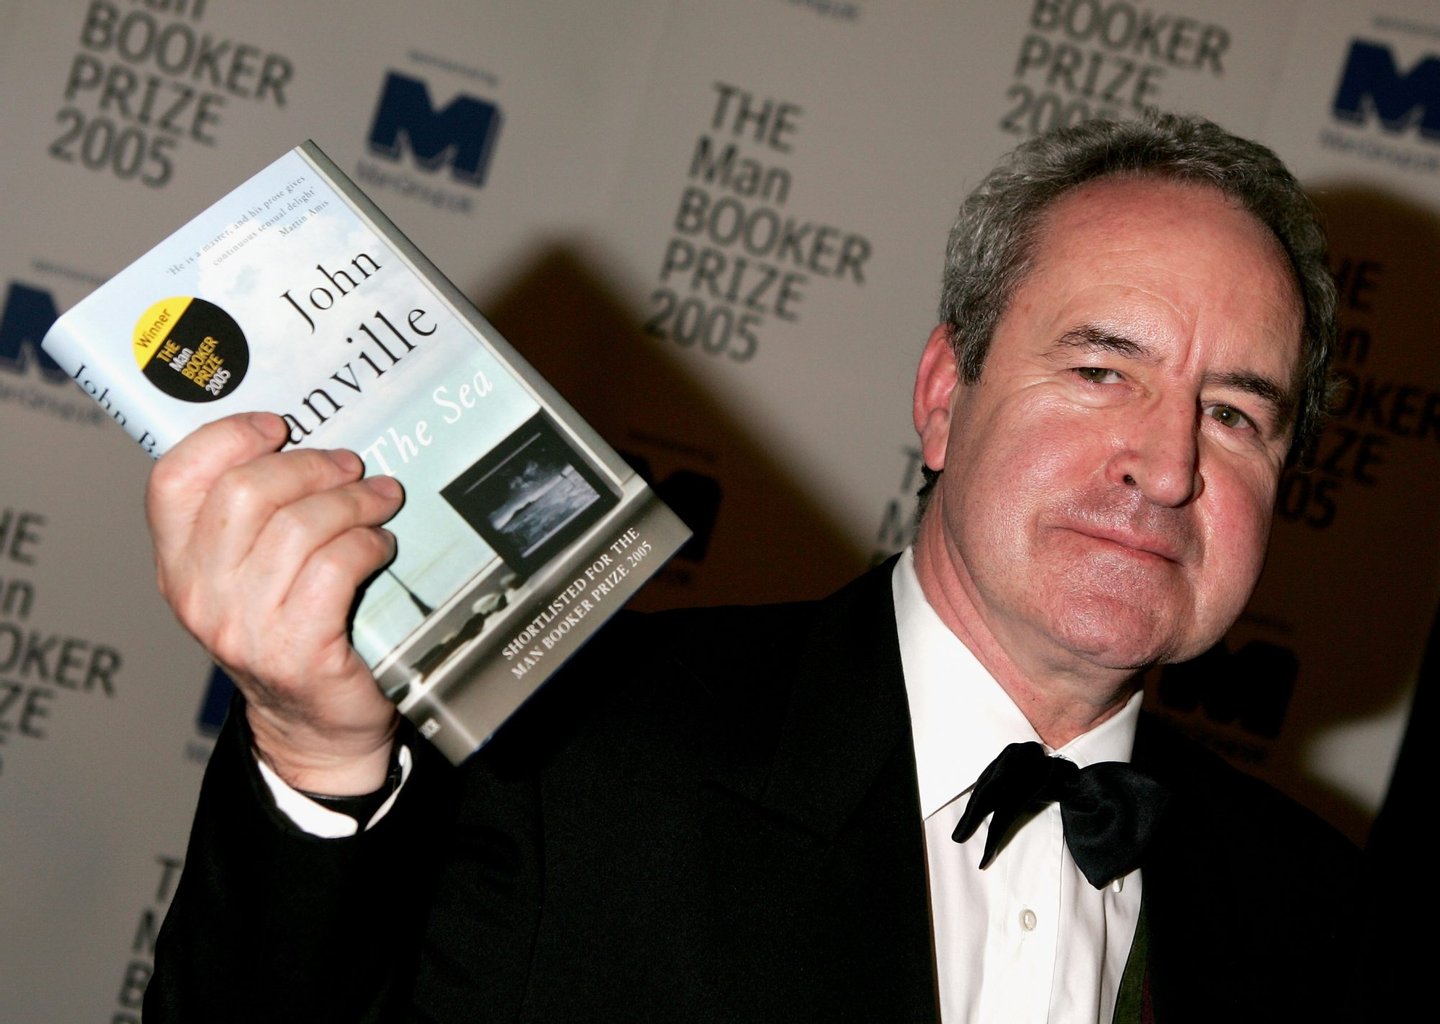 LONDON - OCTOBER 10: Author John Banville poses with his book "The Sea" which won the Man Booker Prize 2005 for novel at the Guildhall October 10, 2005 in London, England. Shortlisted novels for the 50,000-pound literary prize were: Banville's "The Sea;" "The Accidental" by Ali Smith; "Arthur & George" by Julian Barnes; "A Long Long Way" by Sebastian Barry; "Never Let Me Go" by Kazuo Ishiguro; and "On Beauty" by Zadie Smith. (Photo by Chris Jackson/Getty Images)